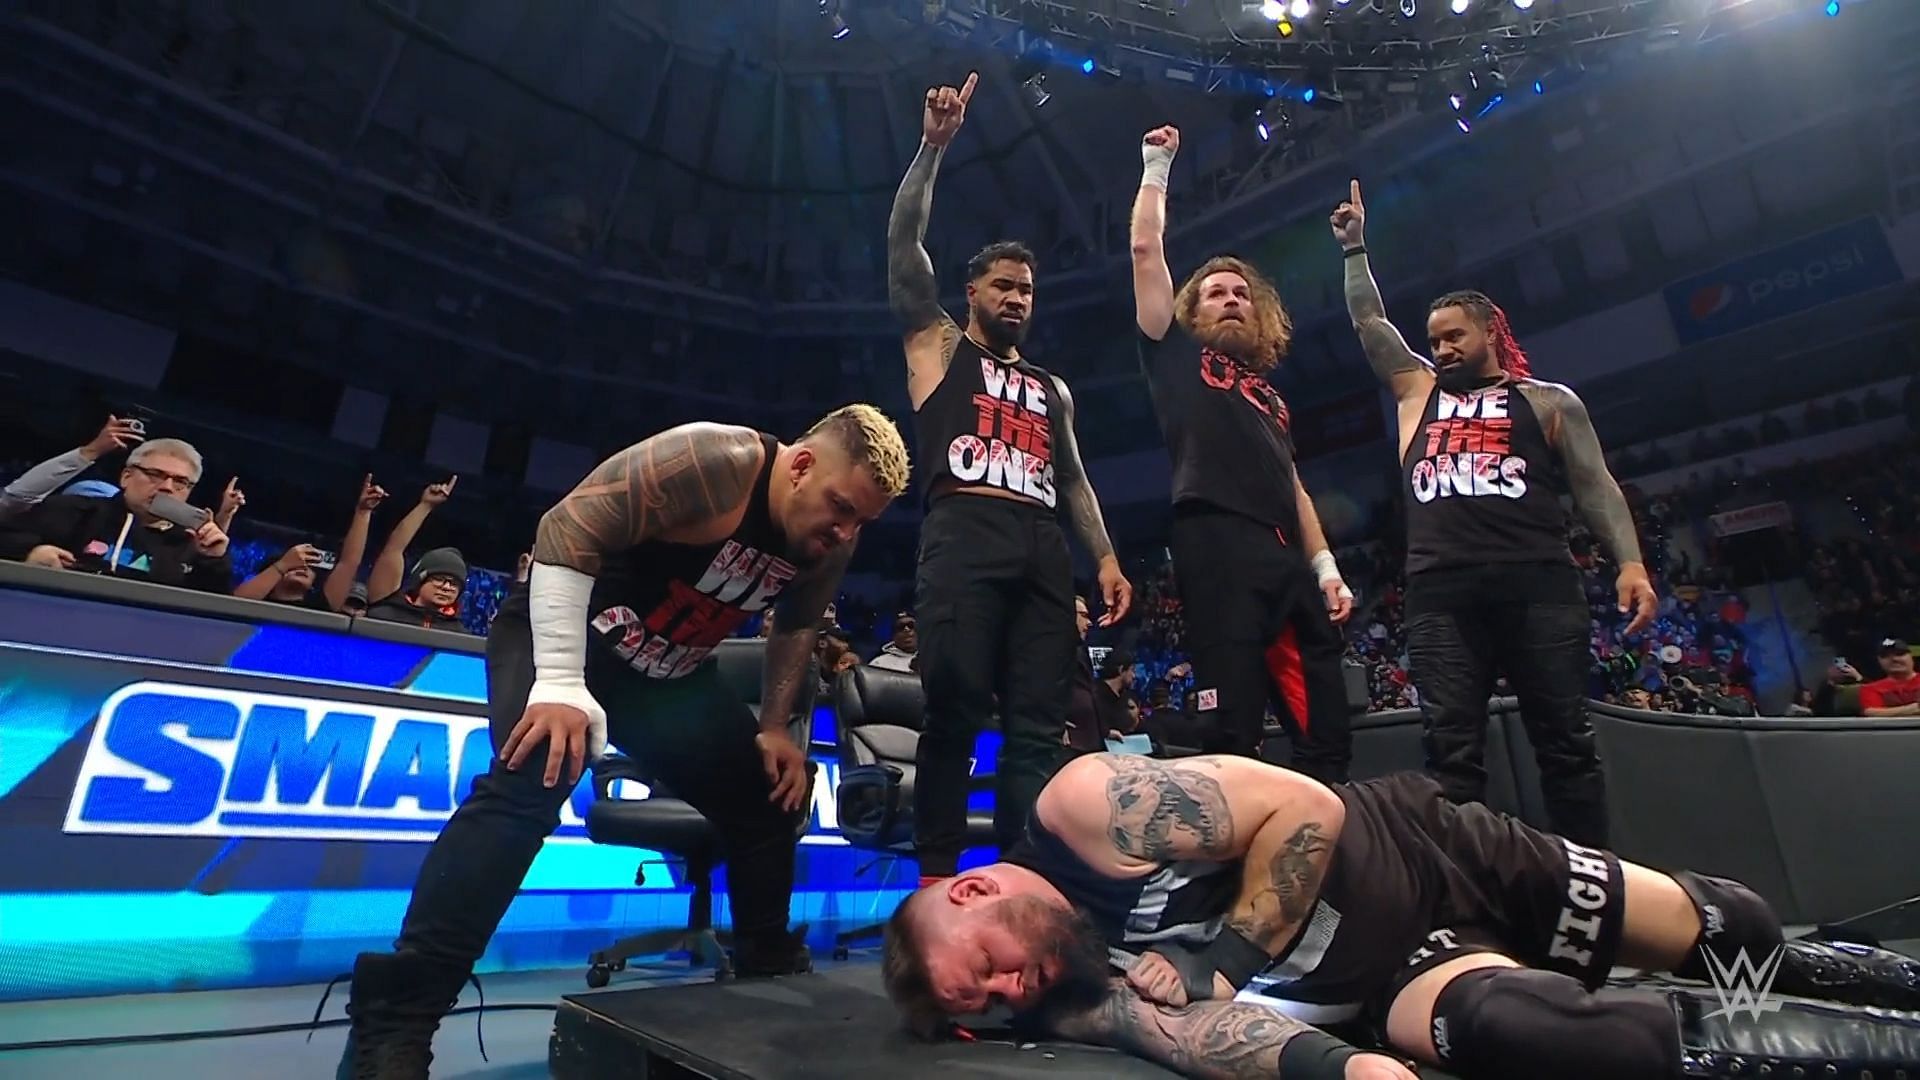 Kevin Owens was made to pay dearly on WWE SmackDown.